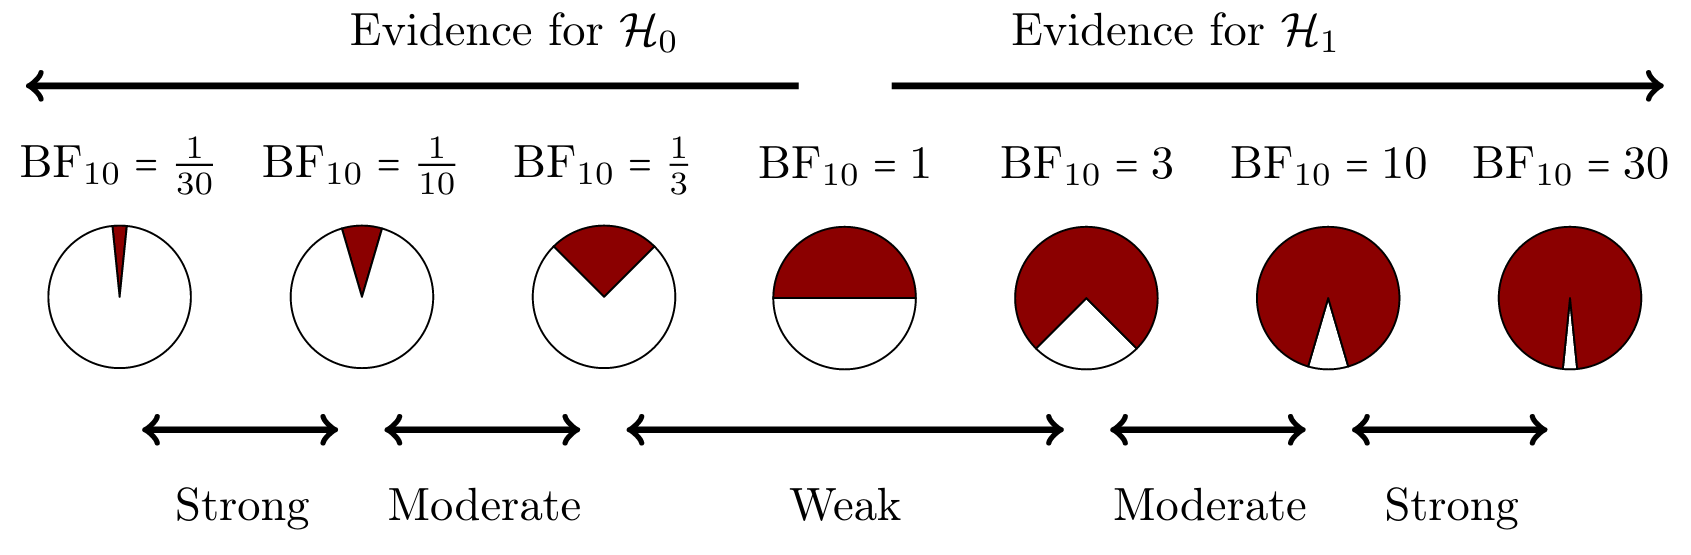 A graphical representation of a Bayes factor classification table. As the Bayes factor deviates from 1, which indicates equal support for $H_0$ and $H_1$, more support is gained for either $H_0$ or $H_1$. The probability wheels illustrate the continuous scale of evidence that Bayes factors represent. These classifications are heuristic and should not be misused as an absolute rule for binary all-or-nothing conclusions.